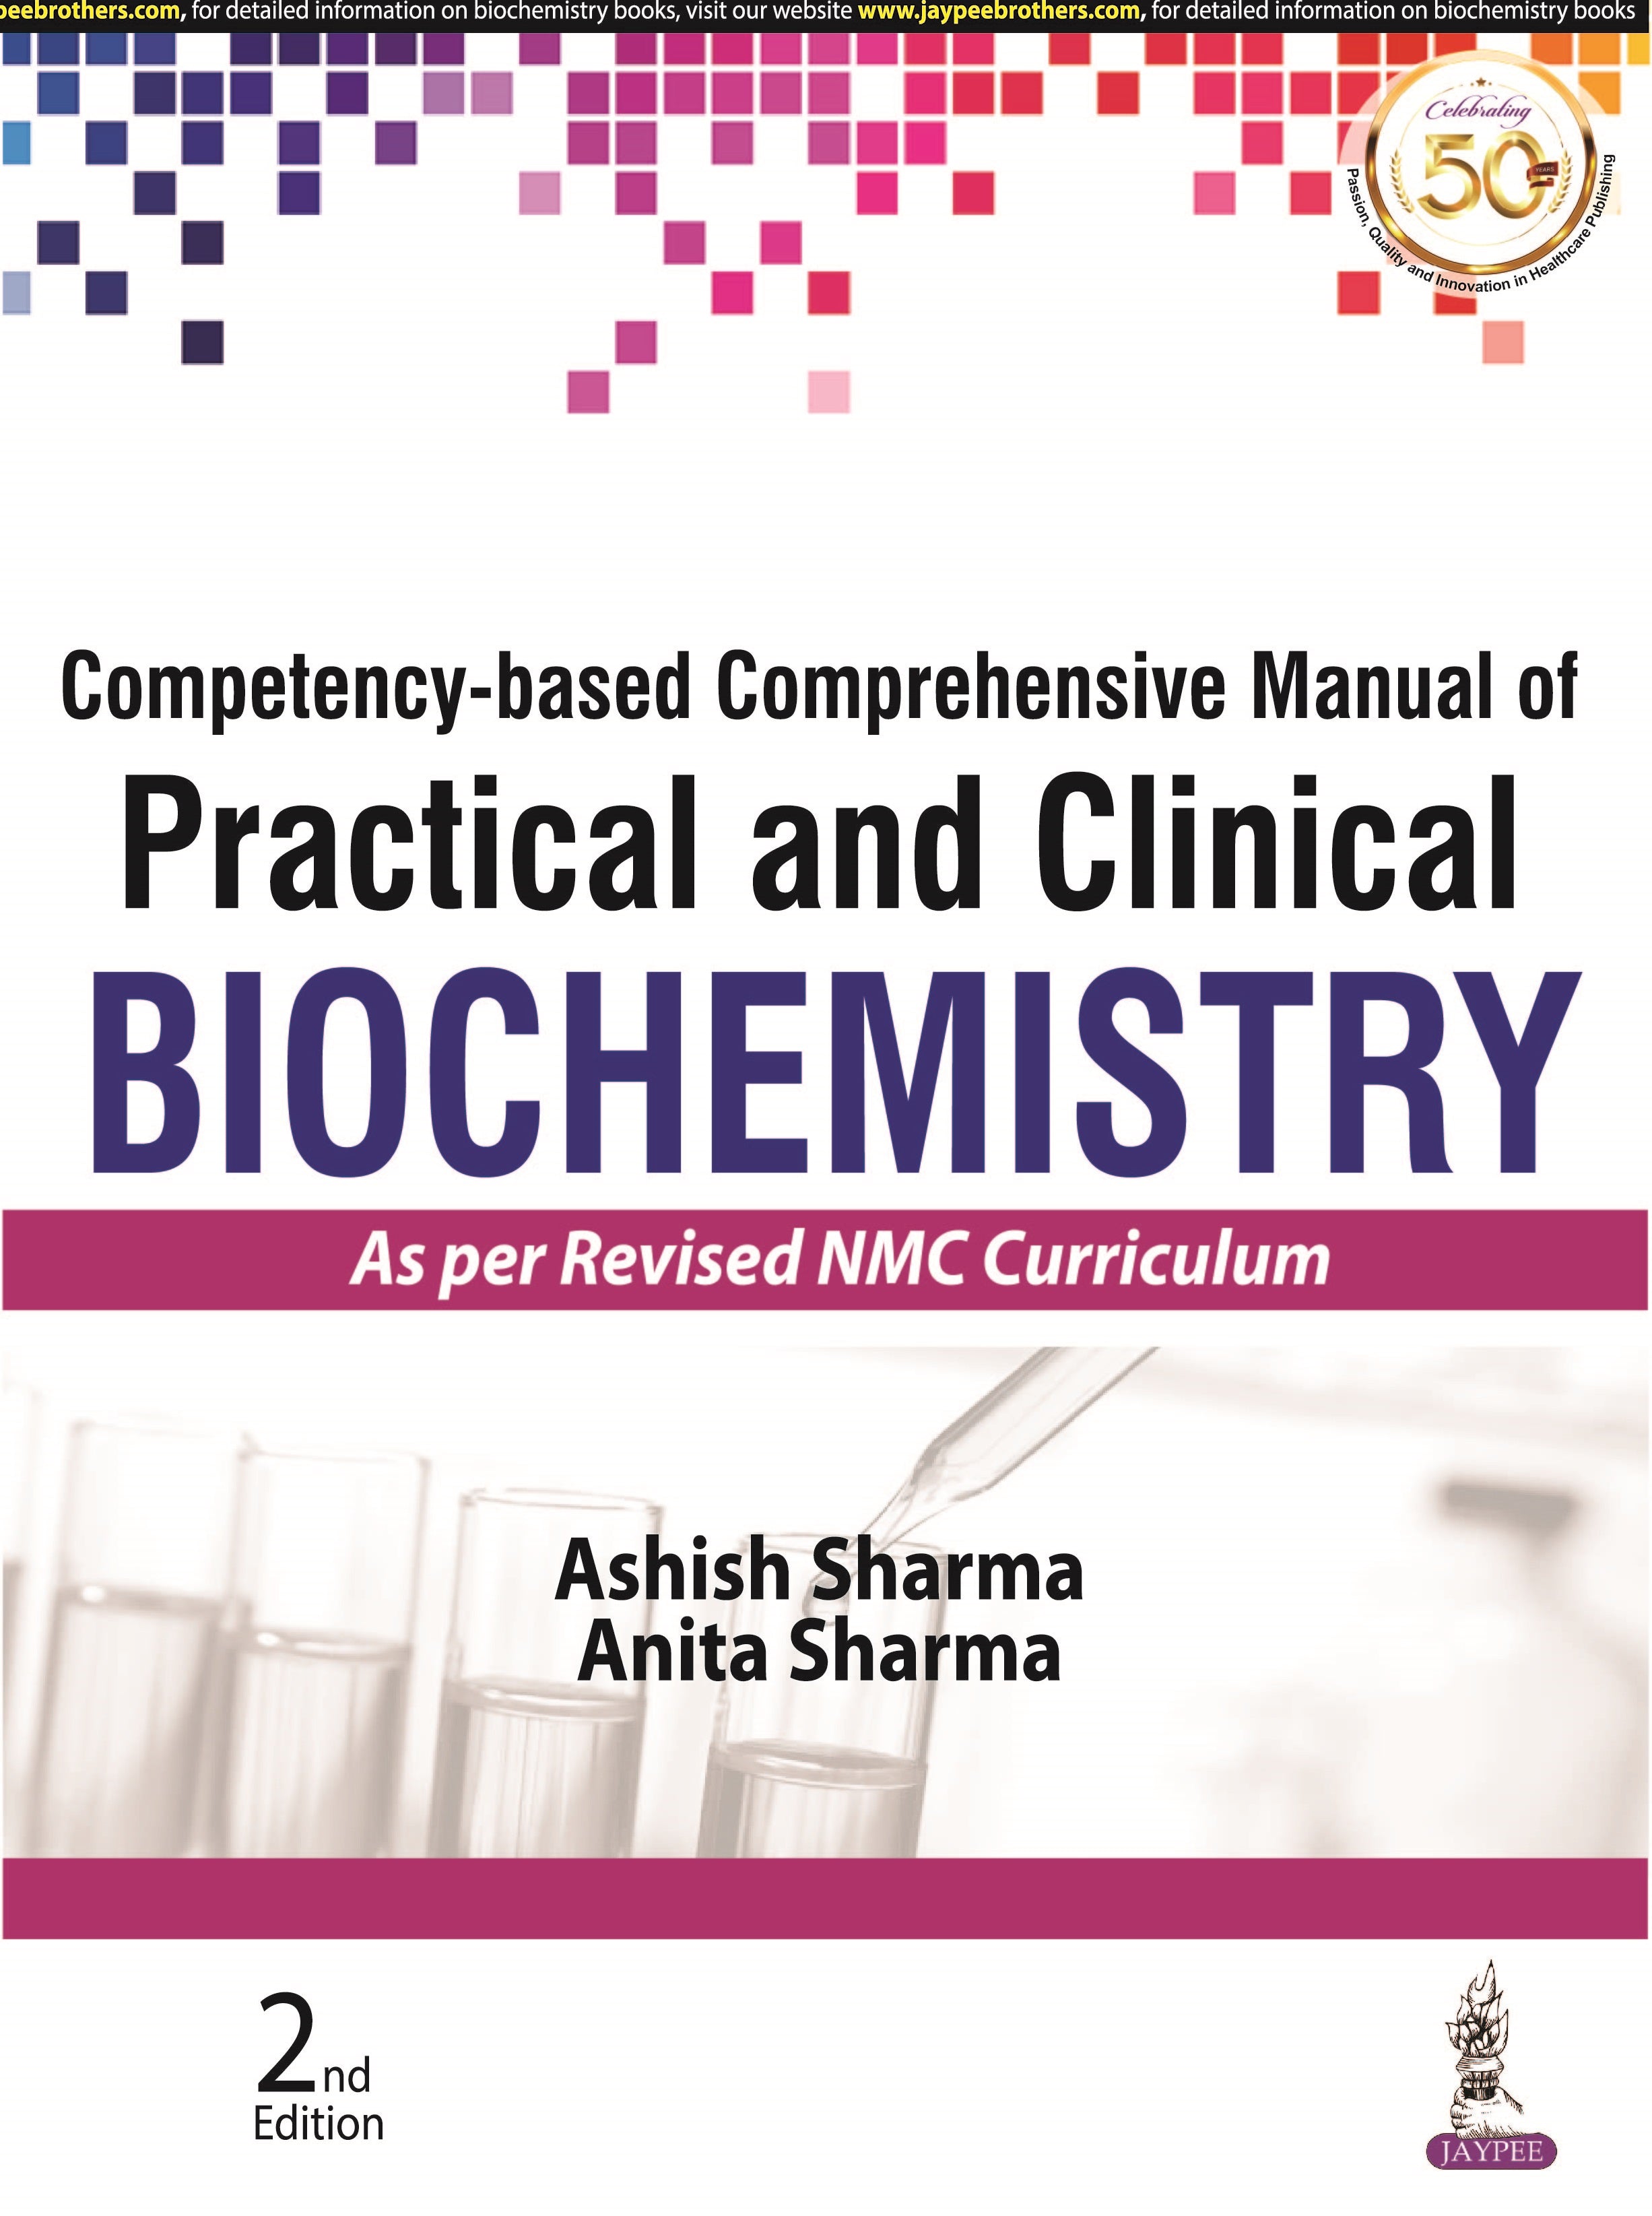 COMPETENCY-BASED COMPREHENSIVE MANUAL OF PRACTICAL AND CLINICAL BIOCHEMISTRY (AS PER REVISED NMC CUR,2/E,ASHISH SHARMA